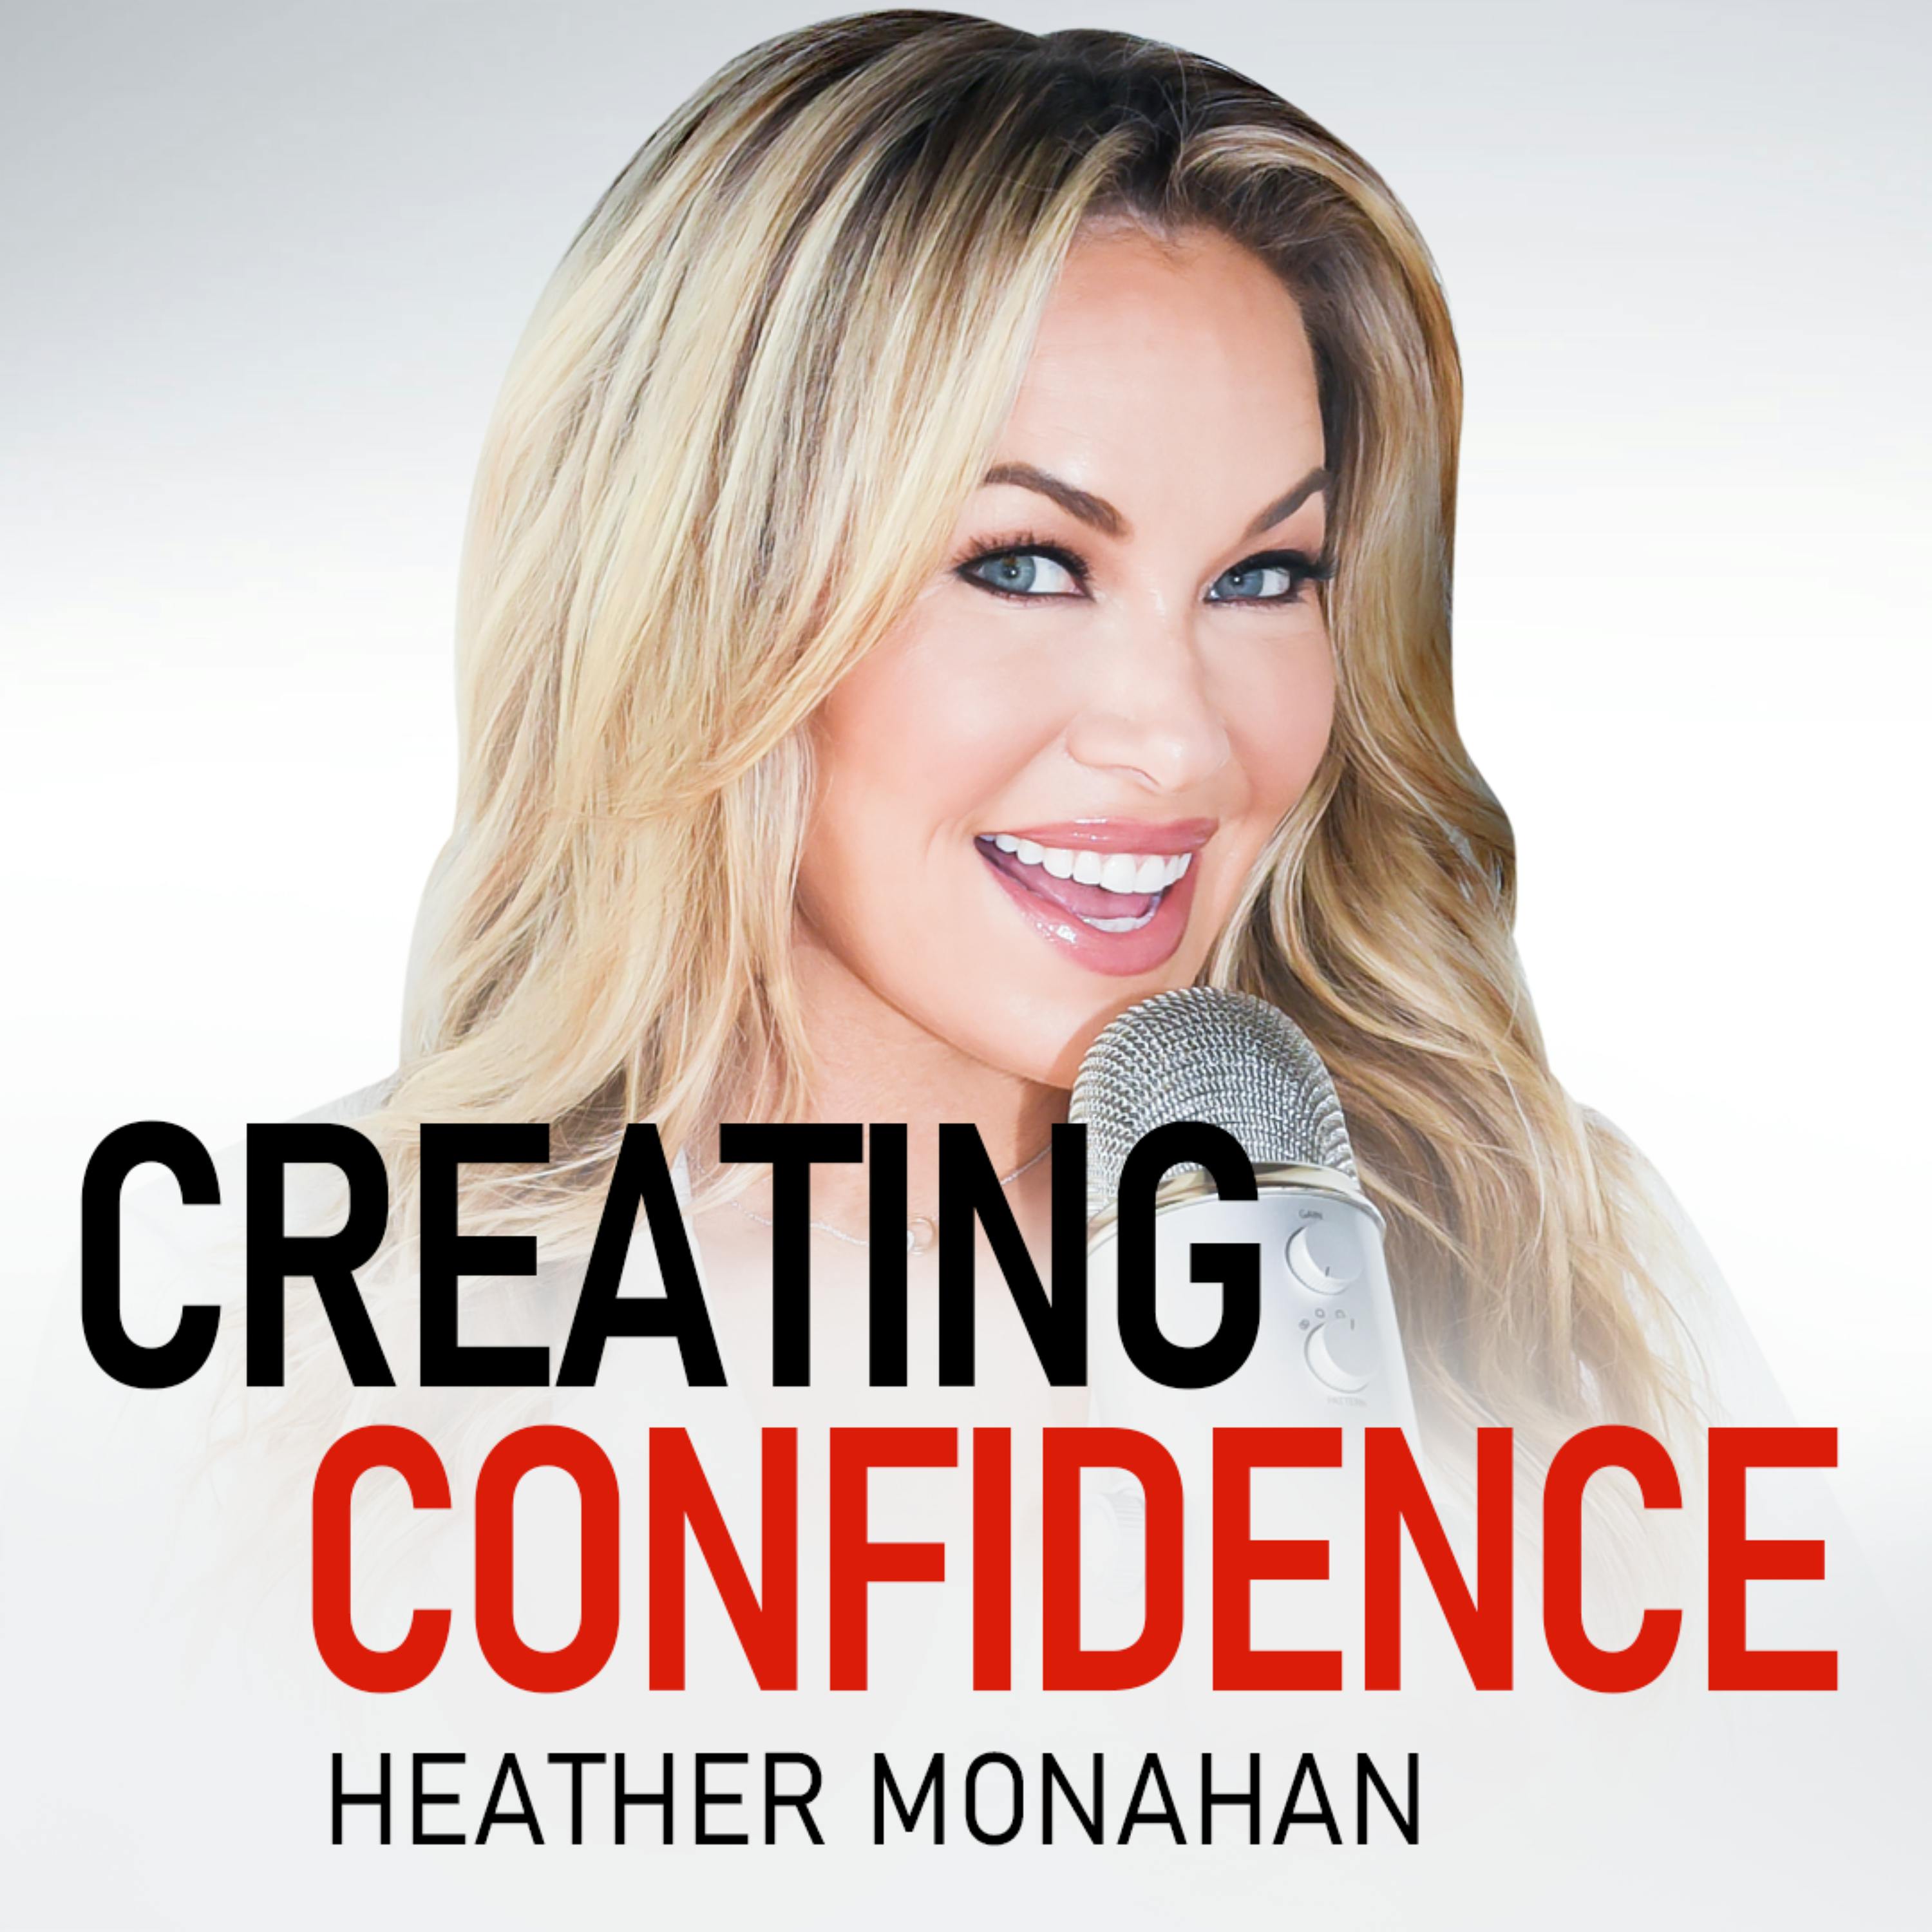  #394: The Tenacity to Triumph: How Perseverance Will Take You To The Top with Justin Prince Entrepreneur, International Speaker, & Author  by Heather Monahan | YAP Media Network